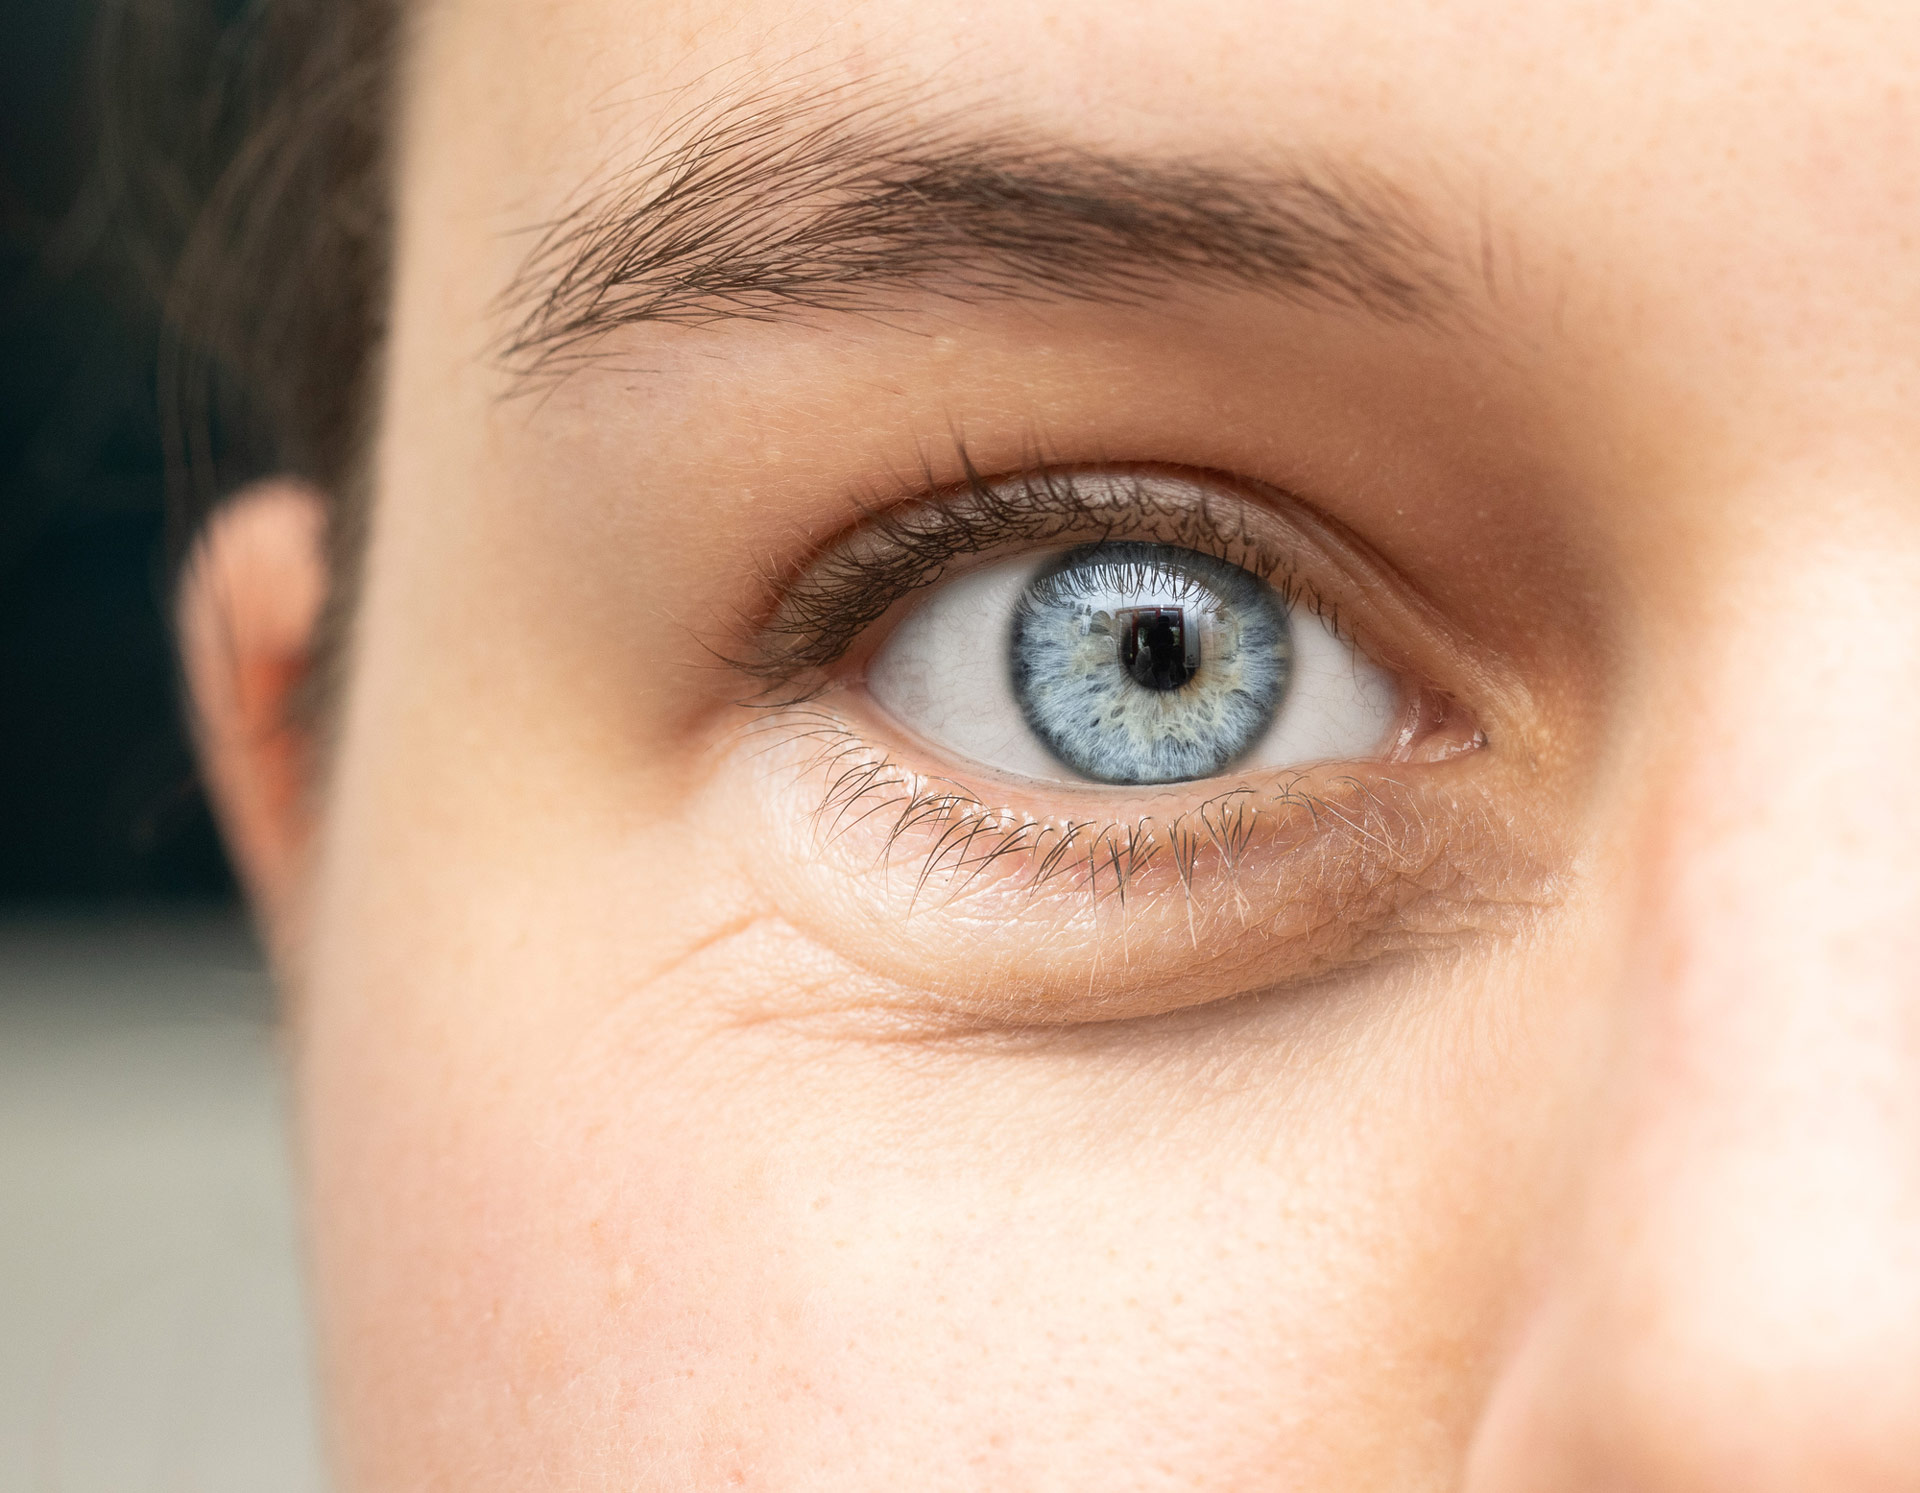 People Whose Eyes Have A Dark Ring Around The Iris Appear More Attractive,  Study Says